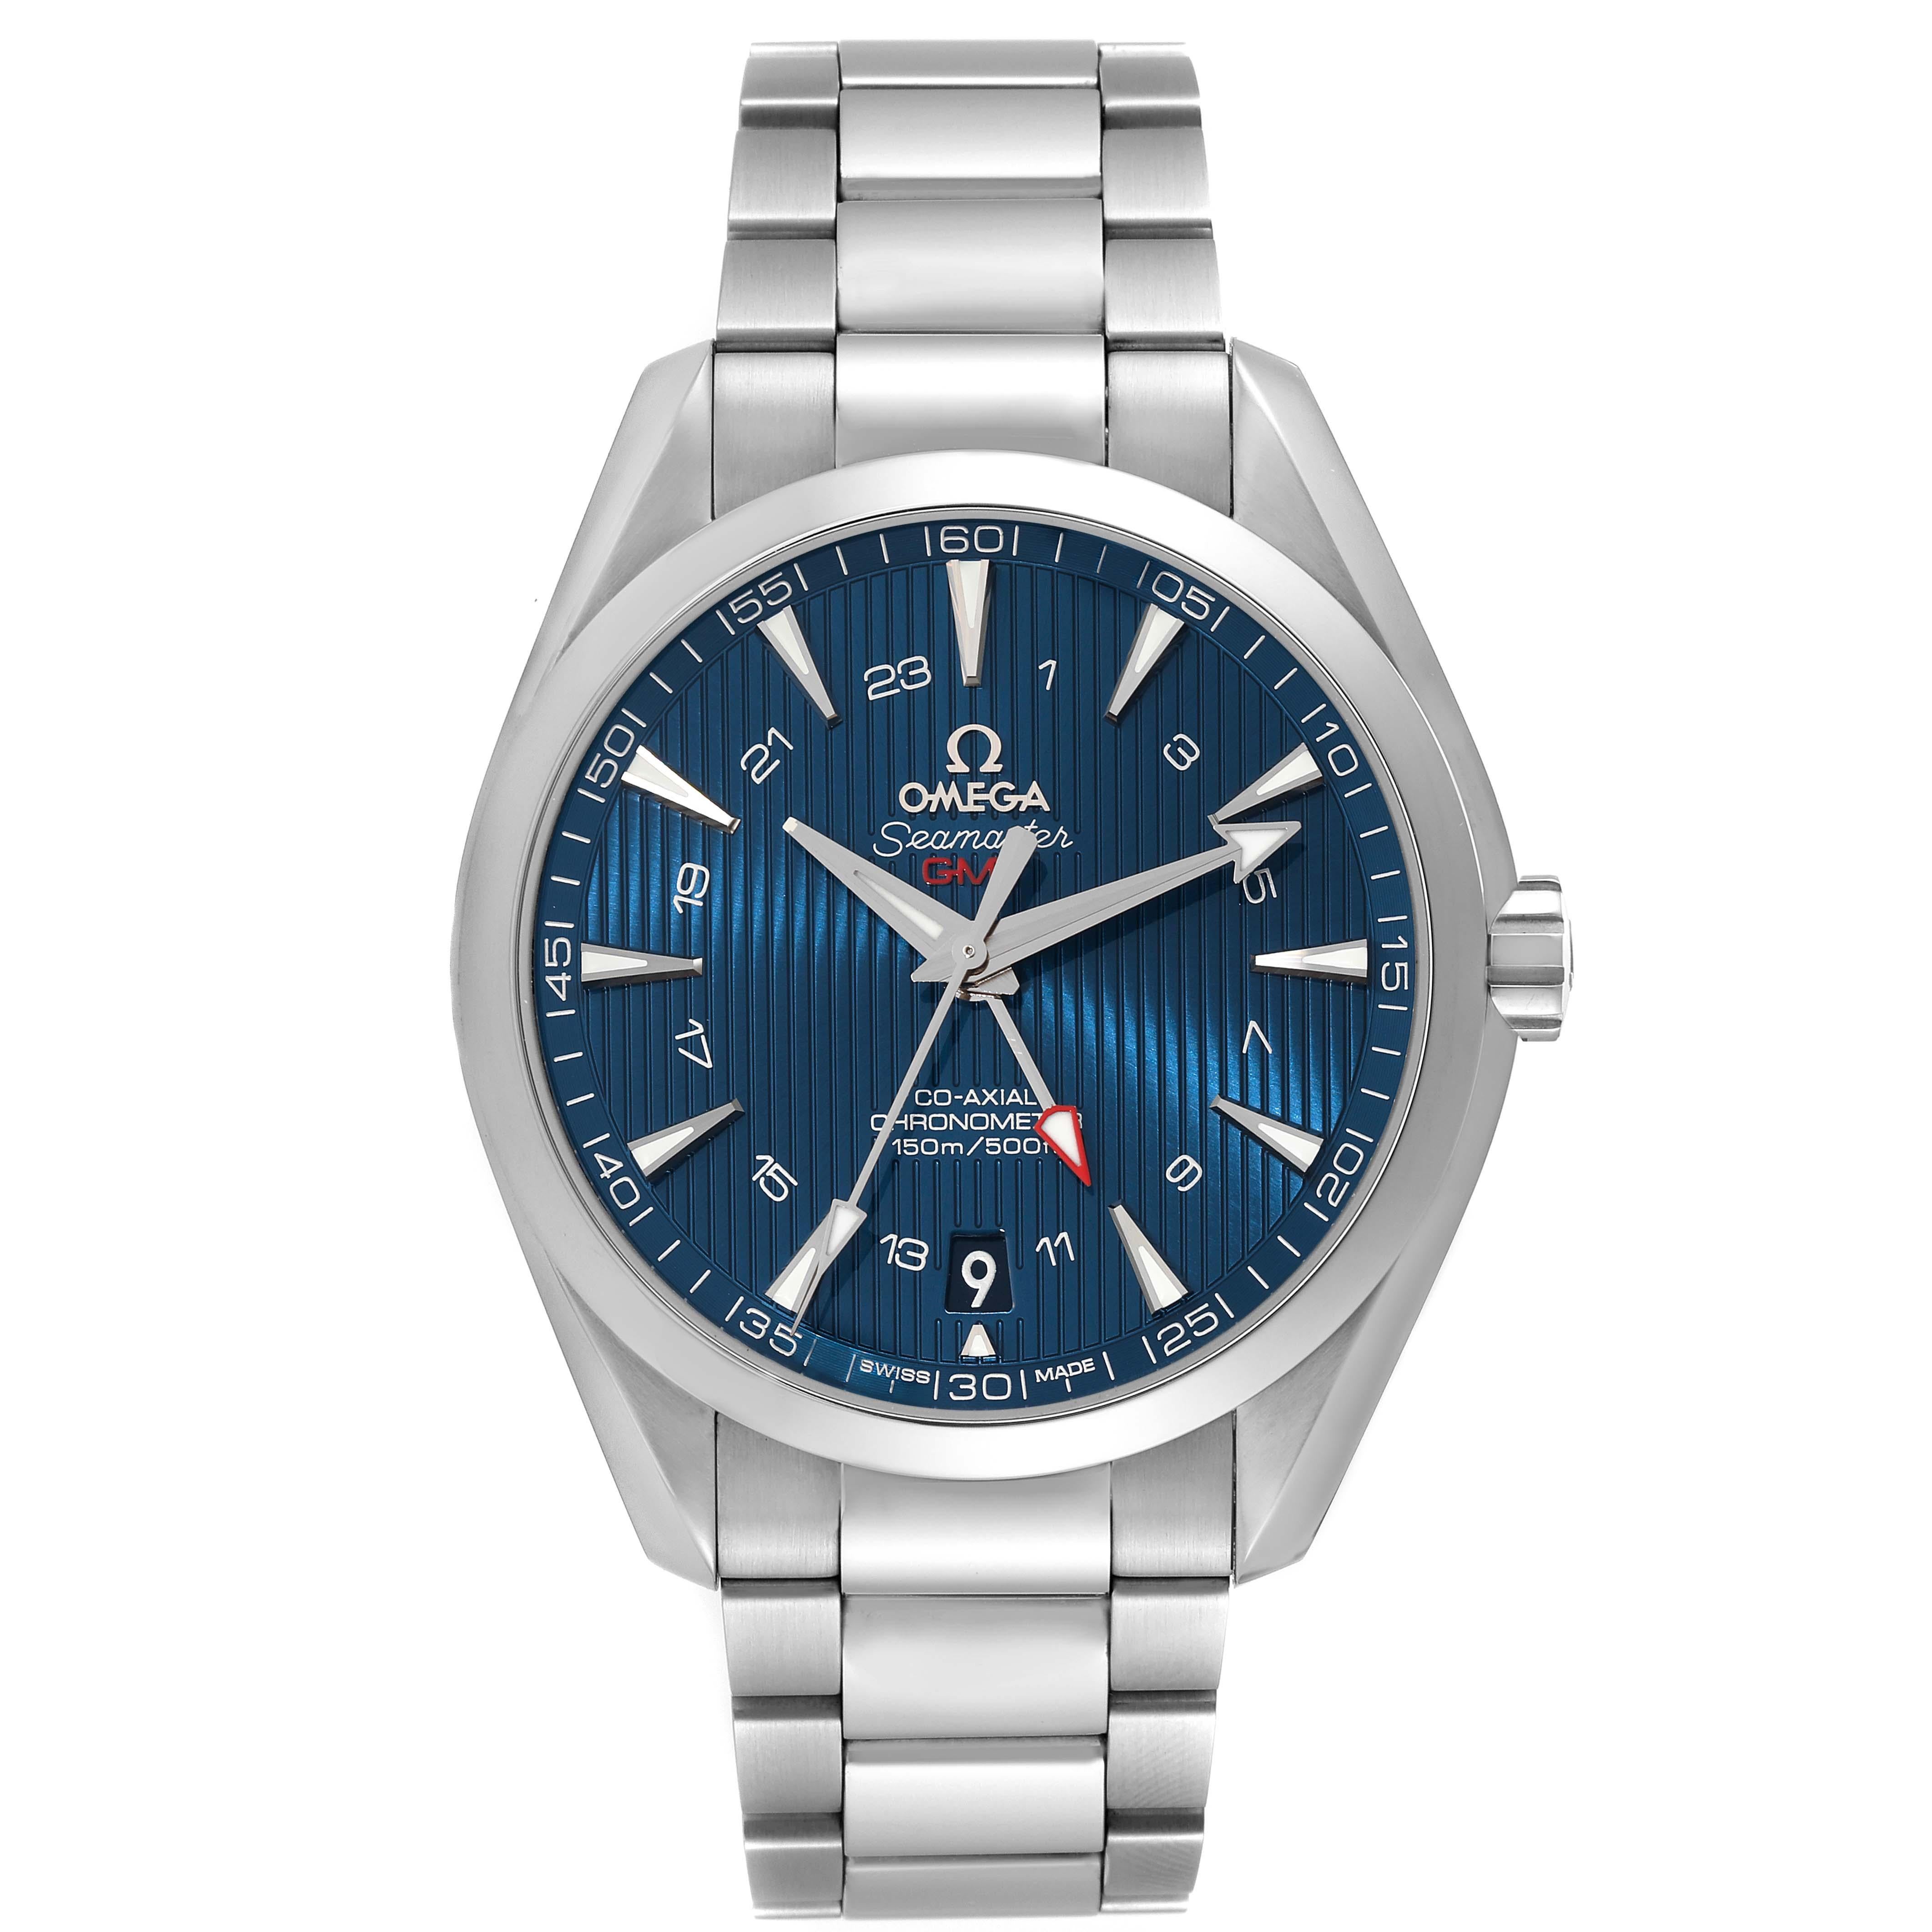 Omega Seamaster Aqua Terra GMT Steel Mens Watch 231.10.43.22.03.001 Box Card. Automatic self-winding movement with Co-Axial Escapement for greater precision. GMT with time zone function. Silicon balance-spring on free sprung-balance, 2 barrels